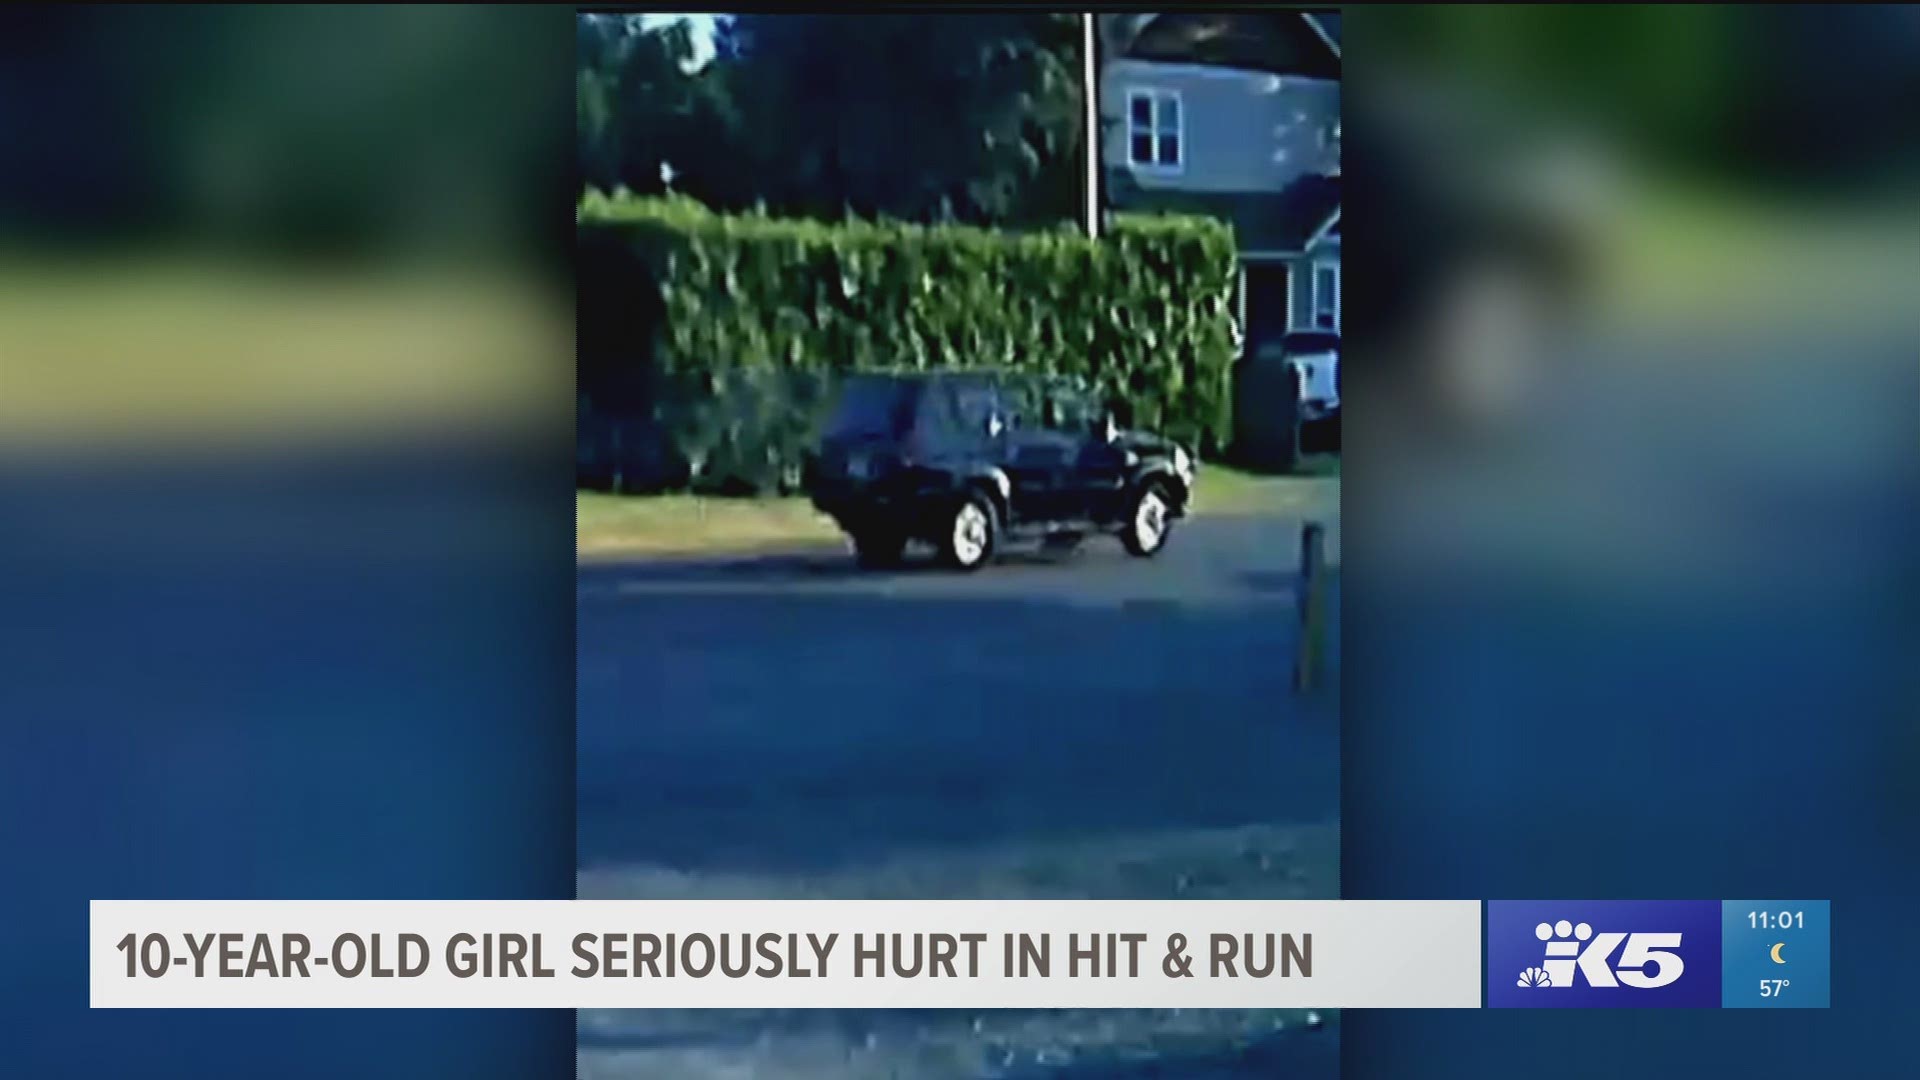 A 10-year-old suffered multiple fractures in a hit-and-run in Pierce County on Saturday night. Police are still searching for the suspect.